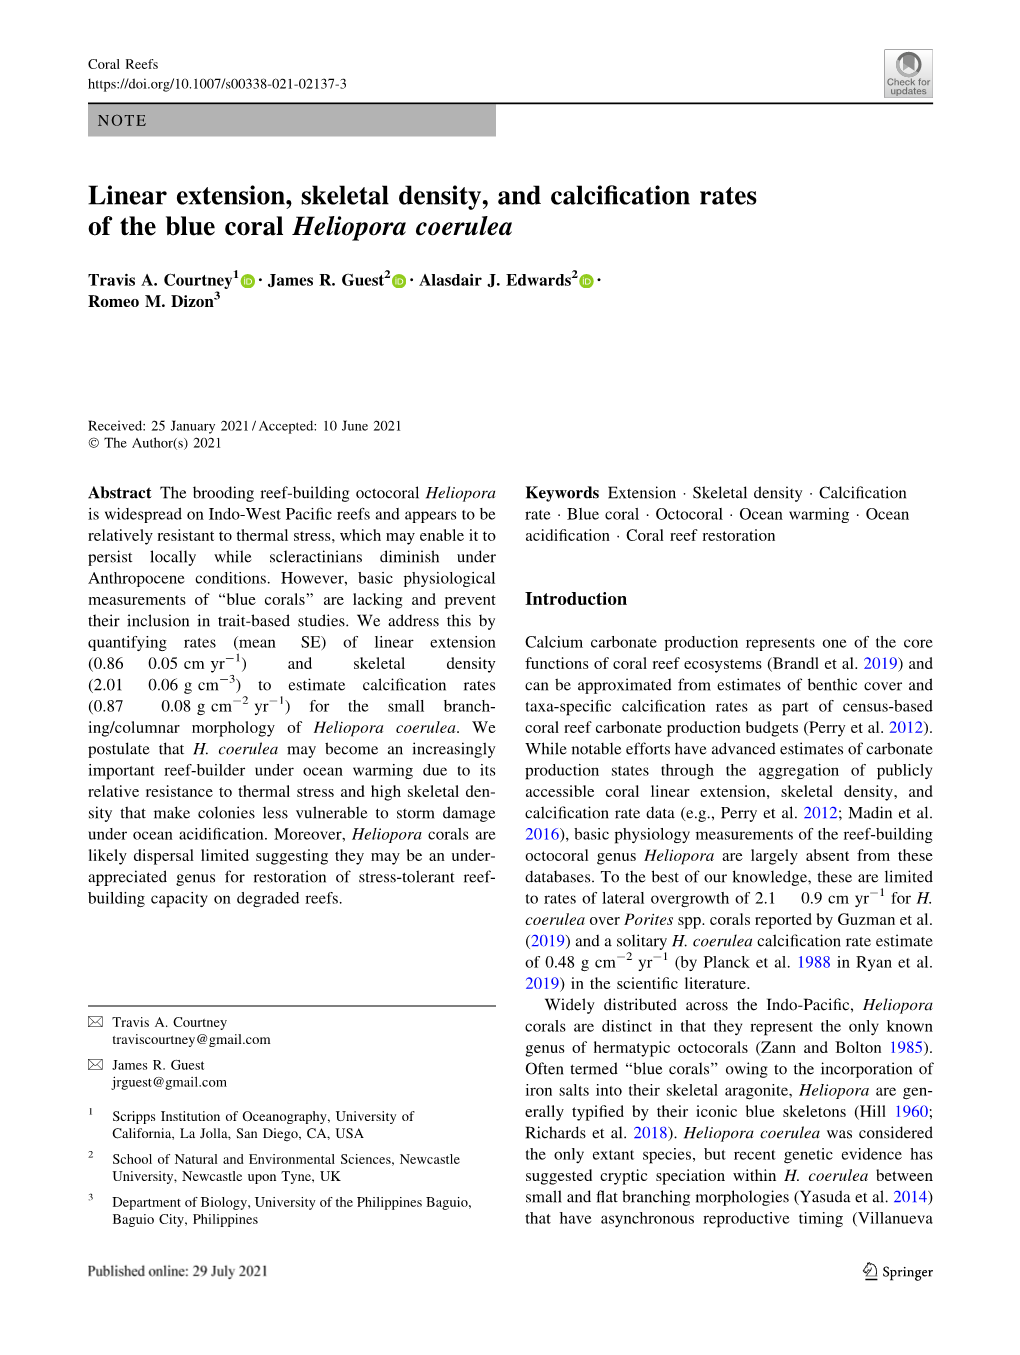 Linear Extension, Skeletal Density, and Calcification Rates of the Blue